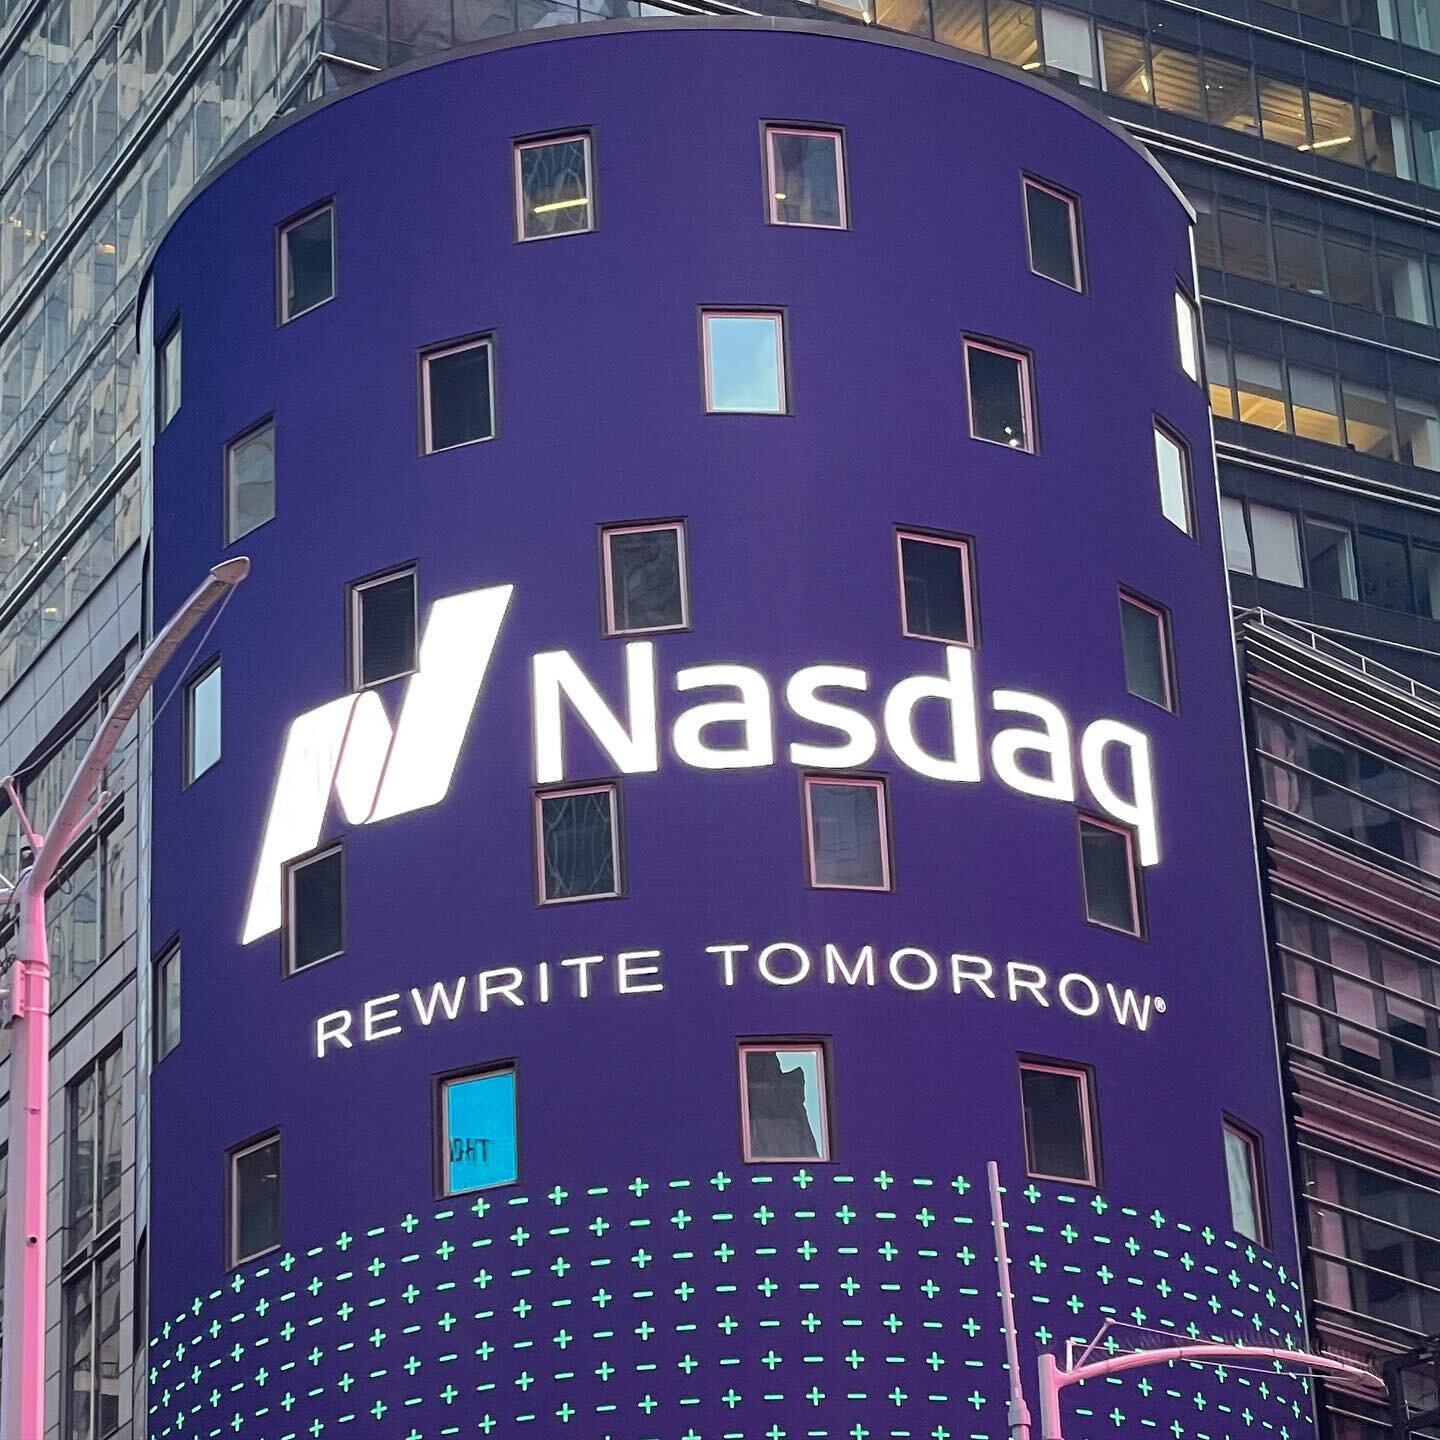 After sailing from Europe to NYC conducting research we were invited to Nasdaq HQ to talk. Their puro.earth platform is very promising. They said most pf the Nasdaq companies will need #carbonremoval to accompany their footprint reductions. #sbti #cd